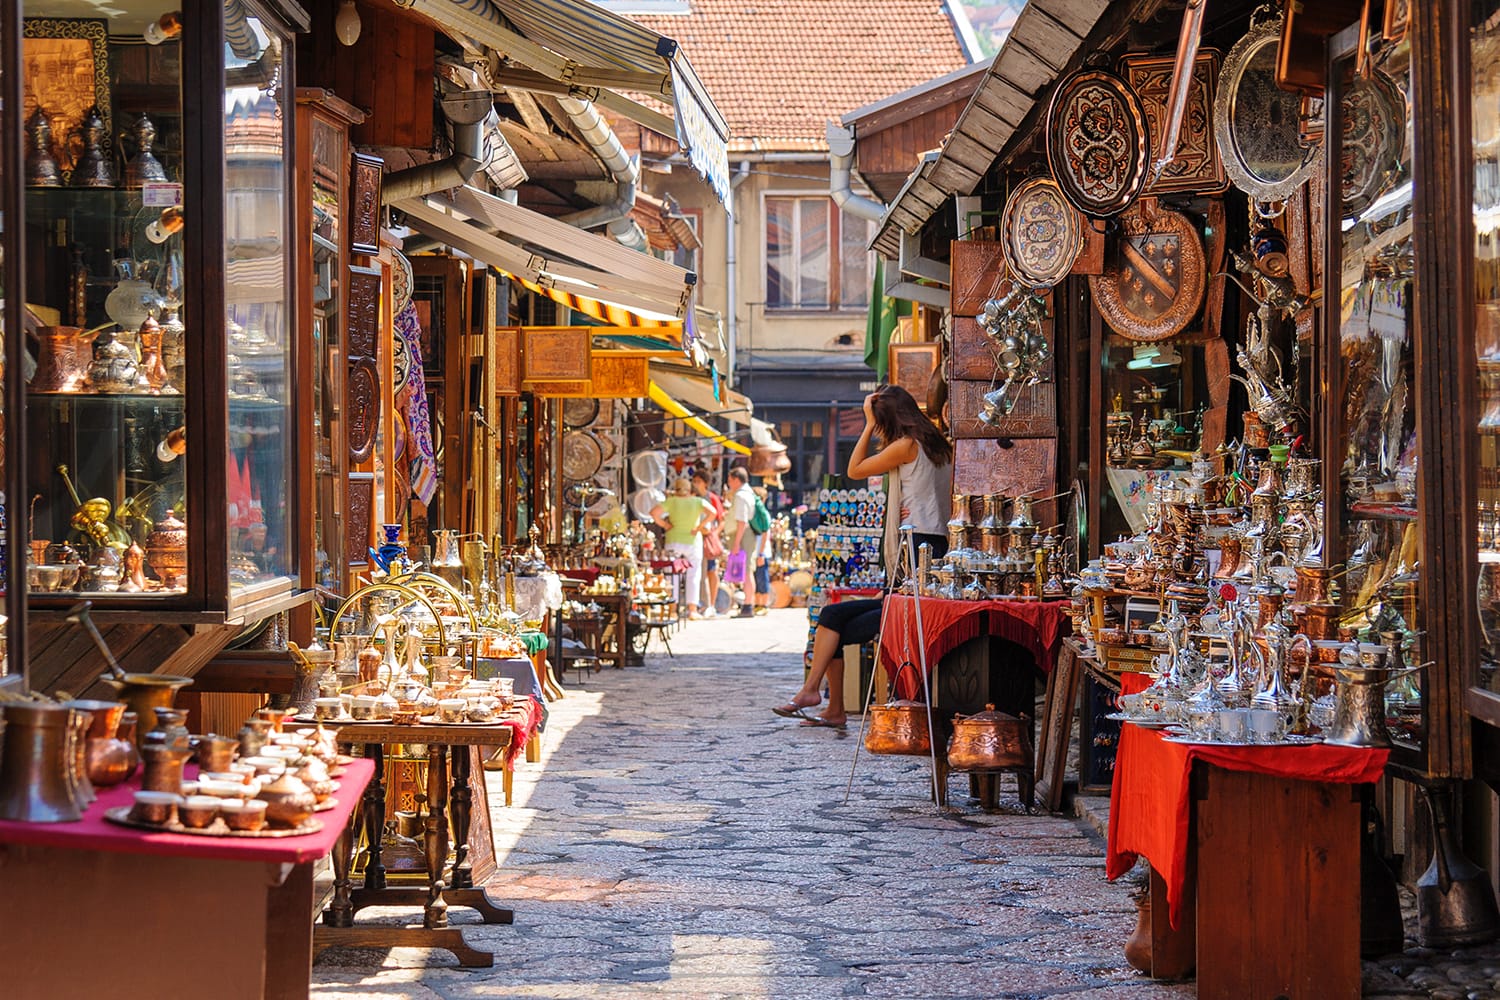 Street with shops selling souvenirs at Bascarsija in the old city district of Sarajevo, Bosnia and Herzegovina